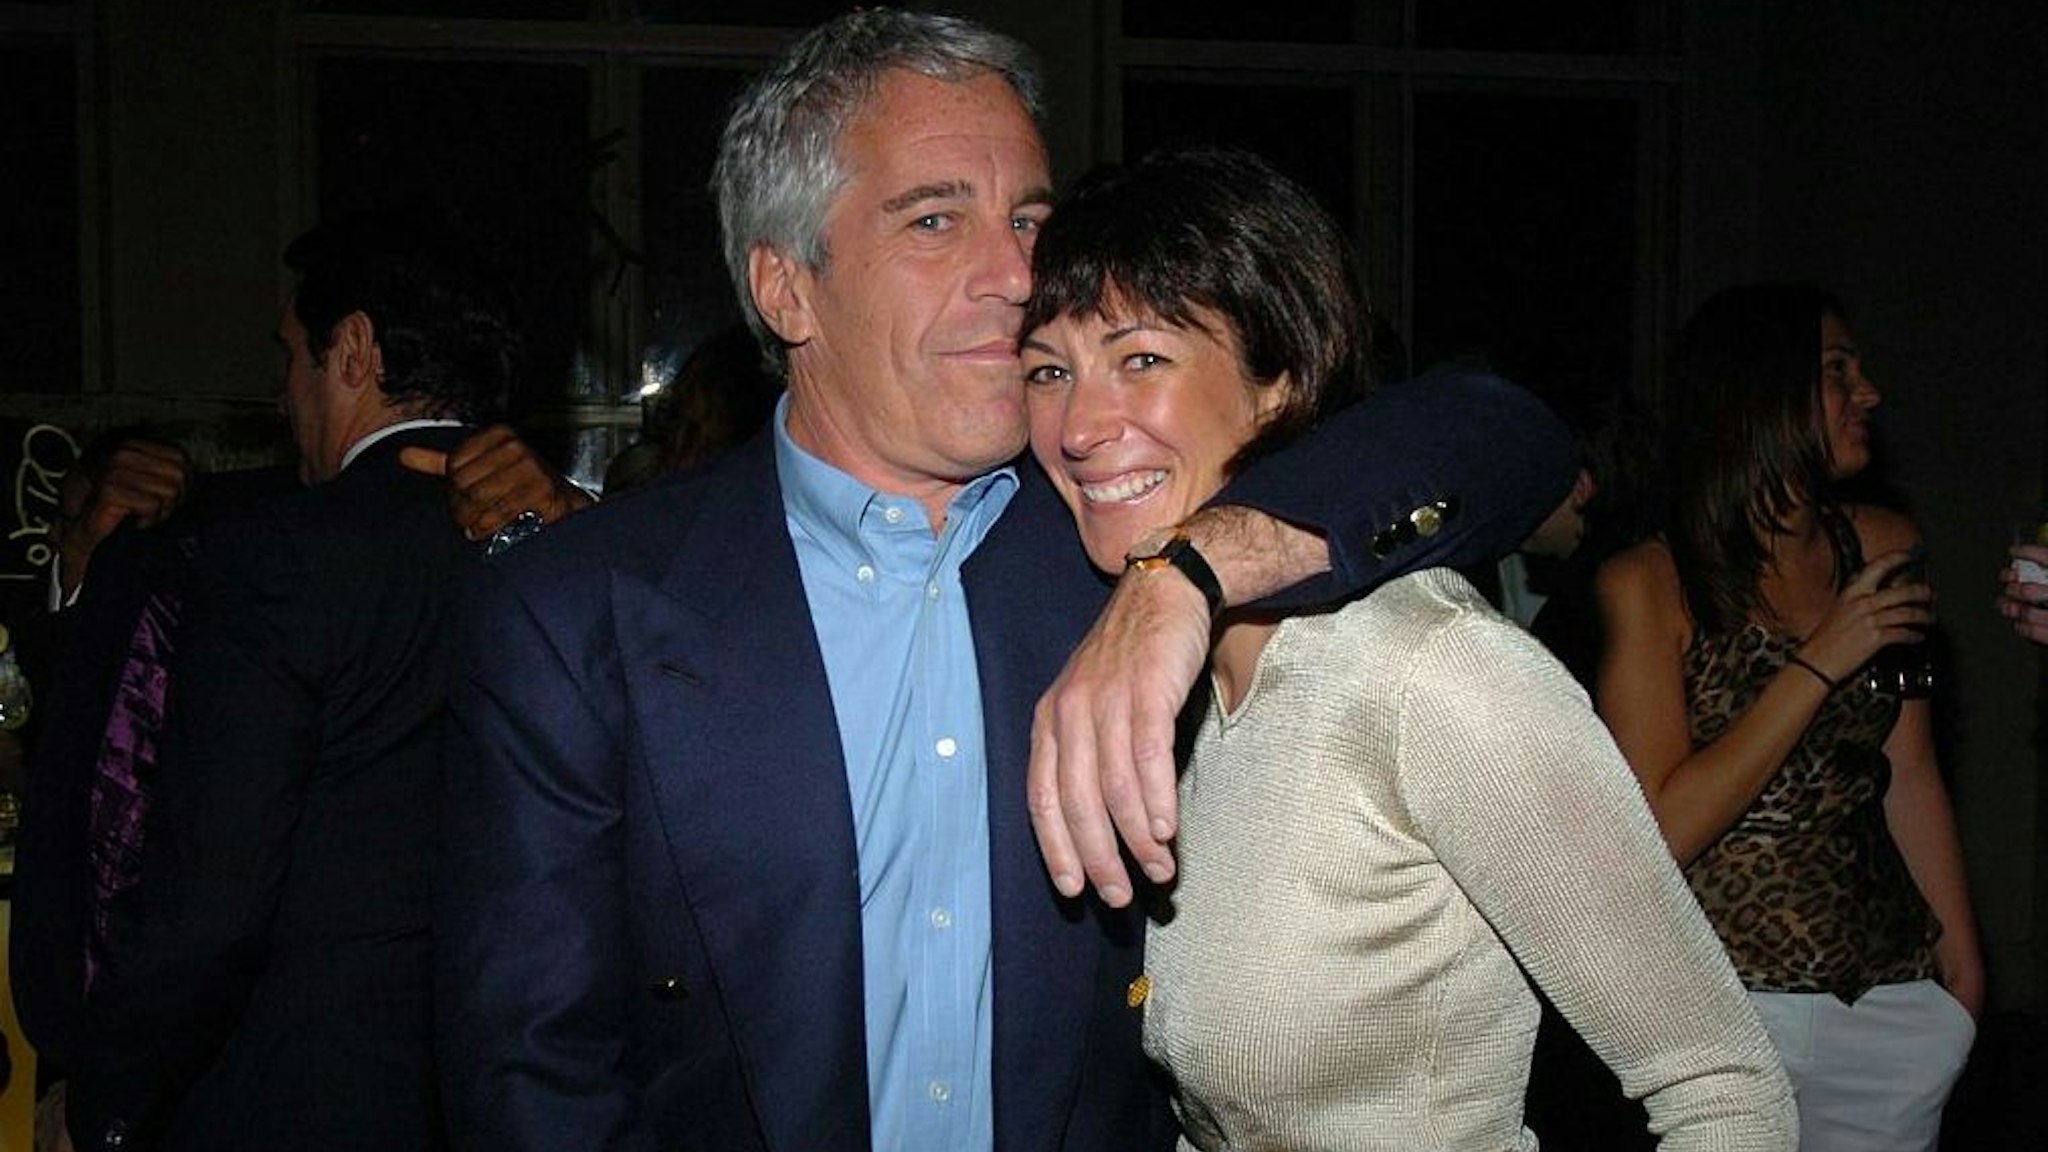 Jeffrey Epstein and Ghislaine Maxwell attend de Grisogono Sponsors The 2005 Wall Street Concert Series Benefitting Wall Street Rising, with a Performance by Rod Stewart at Cipriani Wall Street on March 15, 2005 in New York City.